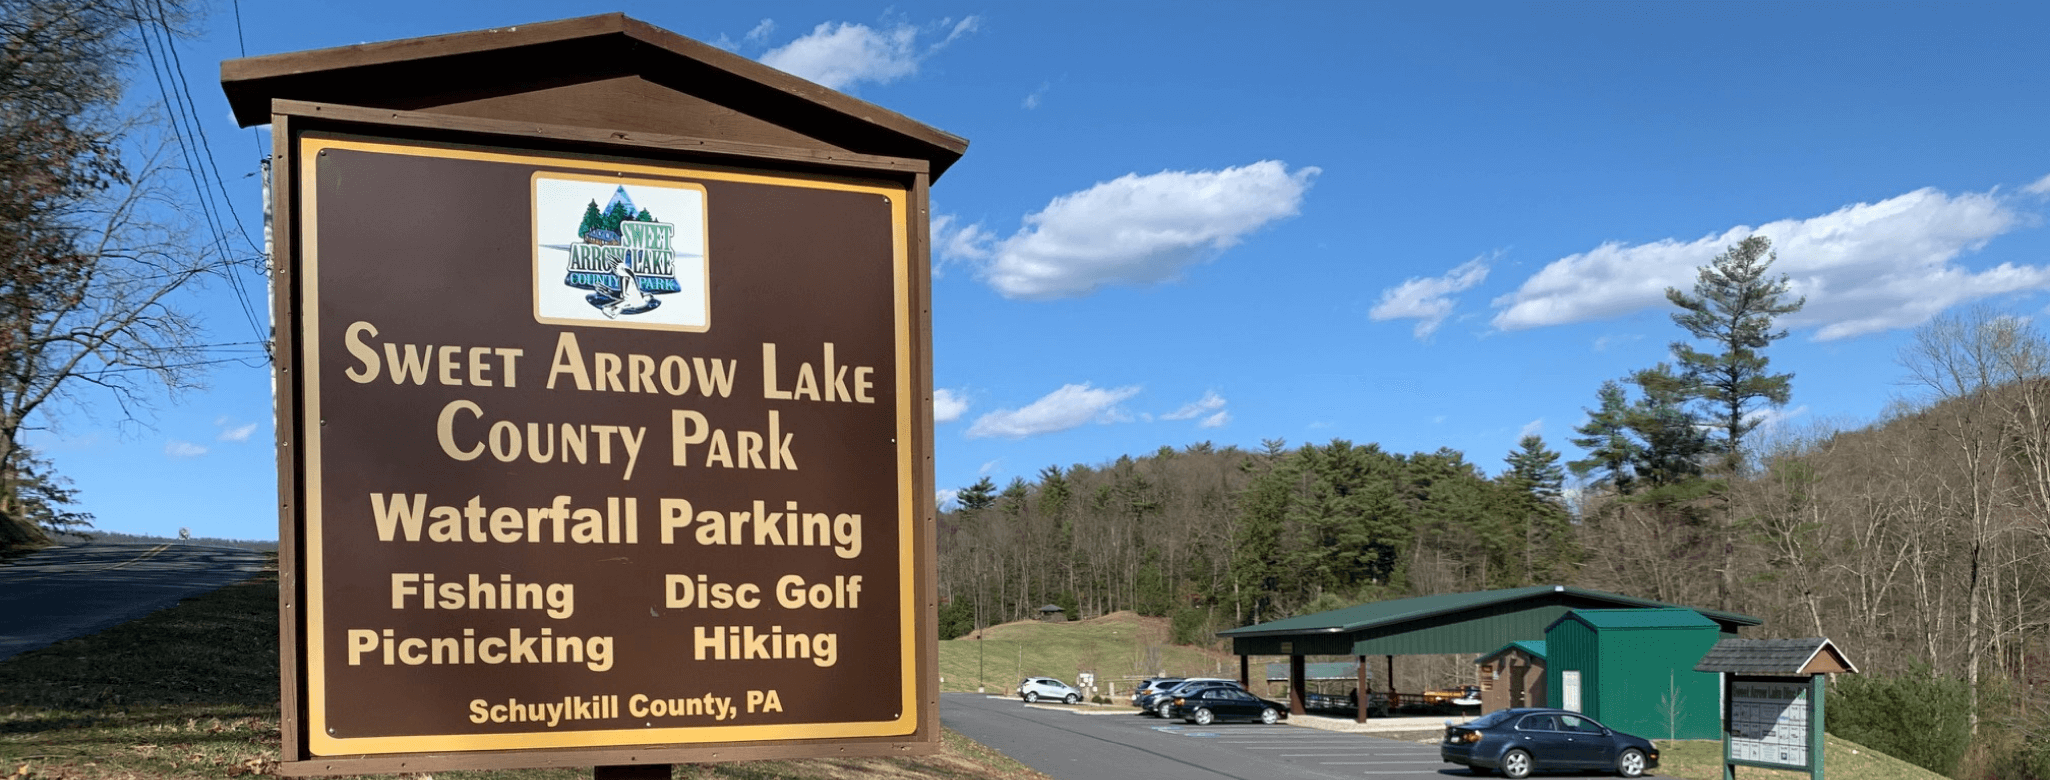 Things To Do At Sweet Arrow Lake County Park